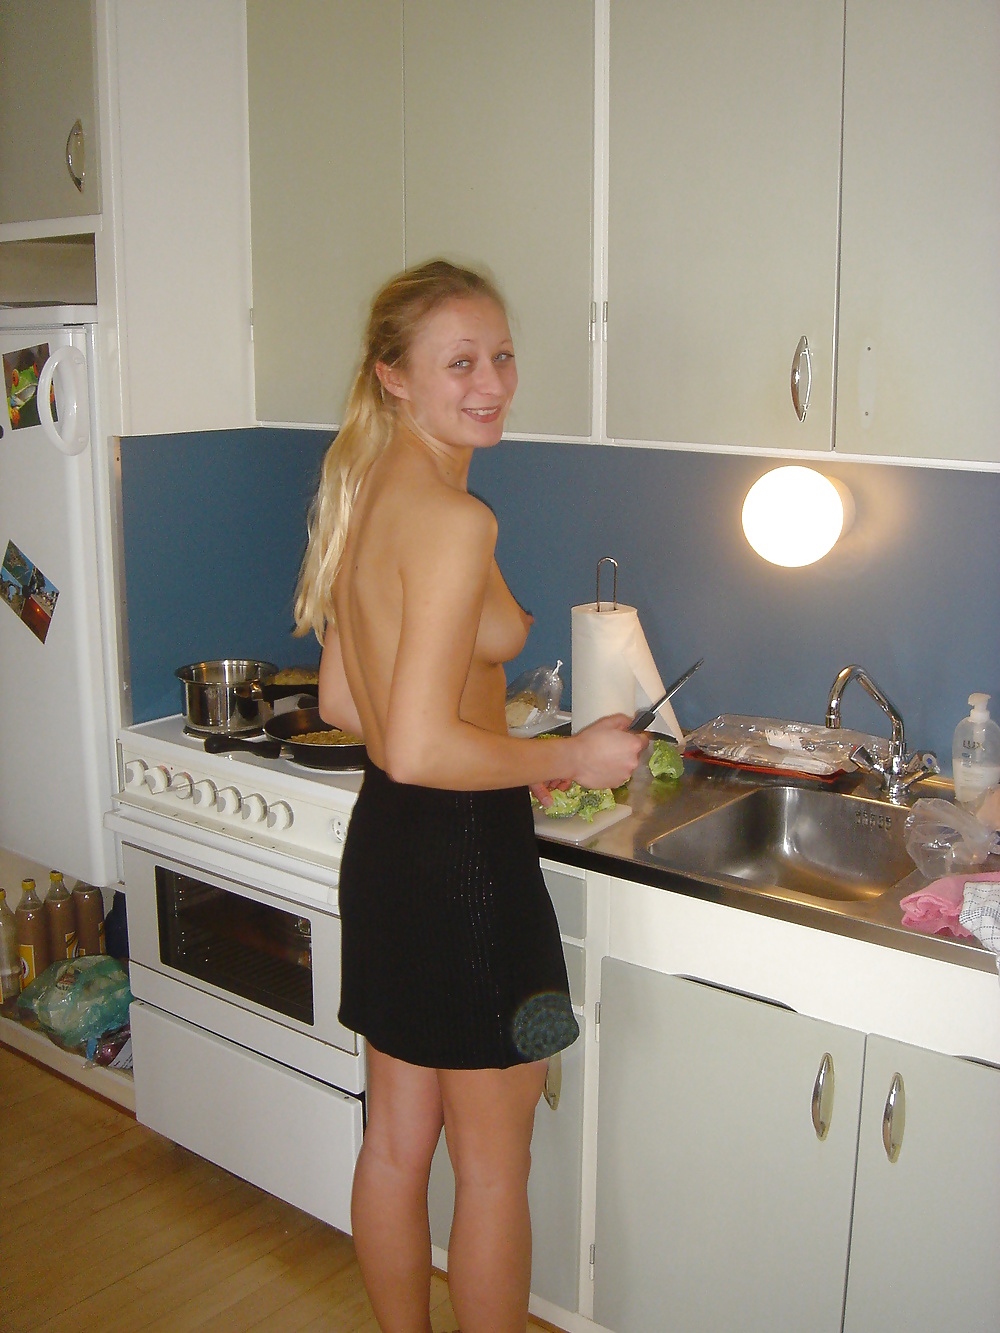 Swedish blondie private vacation pics porn pictures